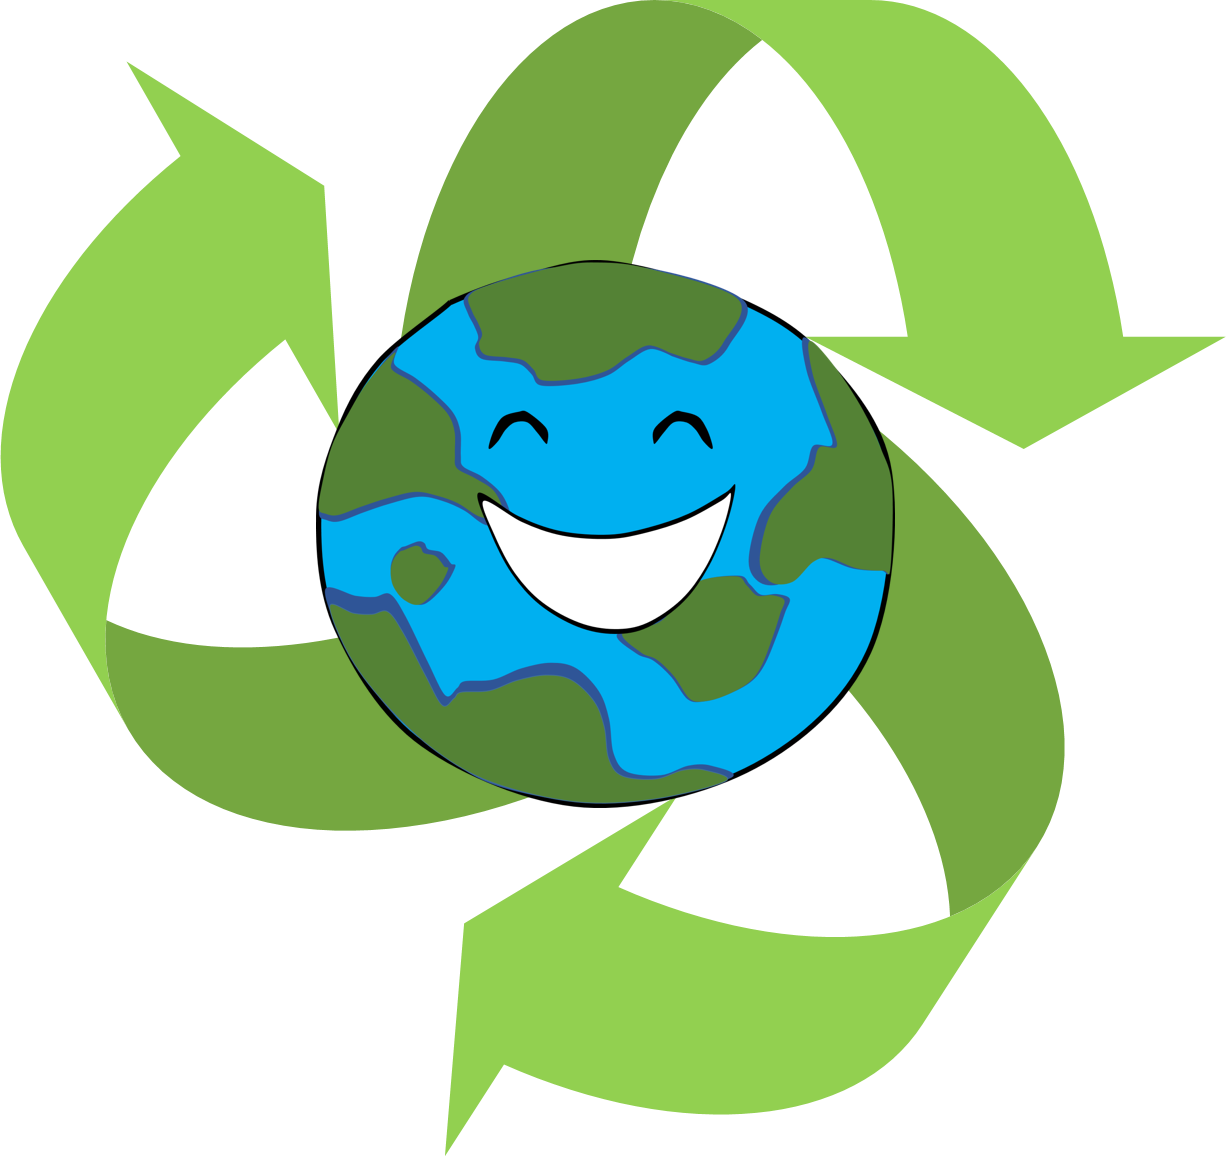 Recycle Clipart & Recycle Clip Art Images.